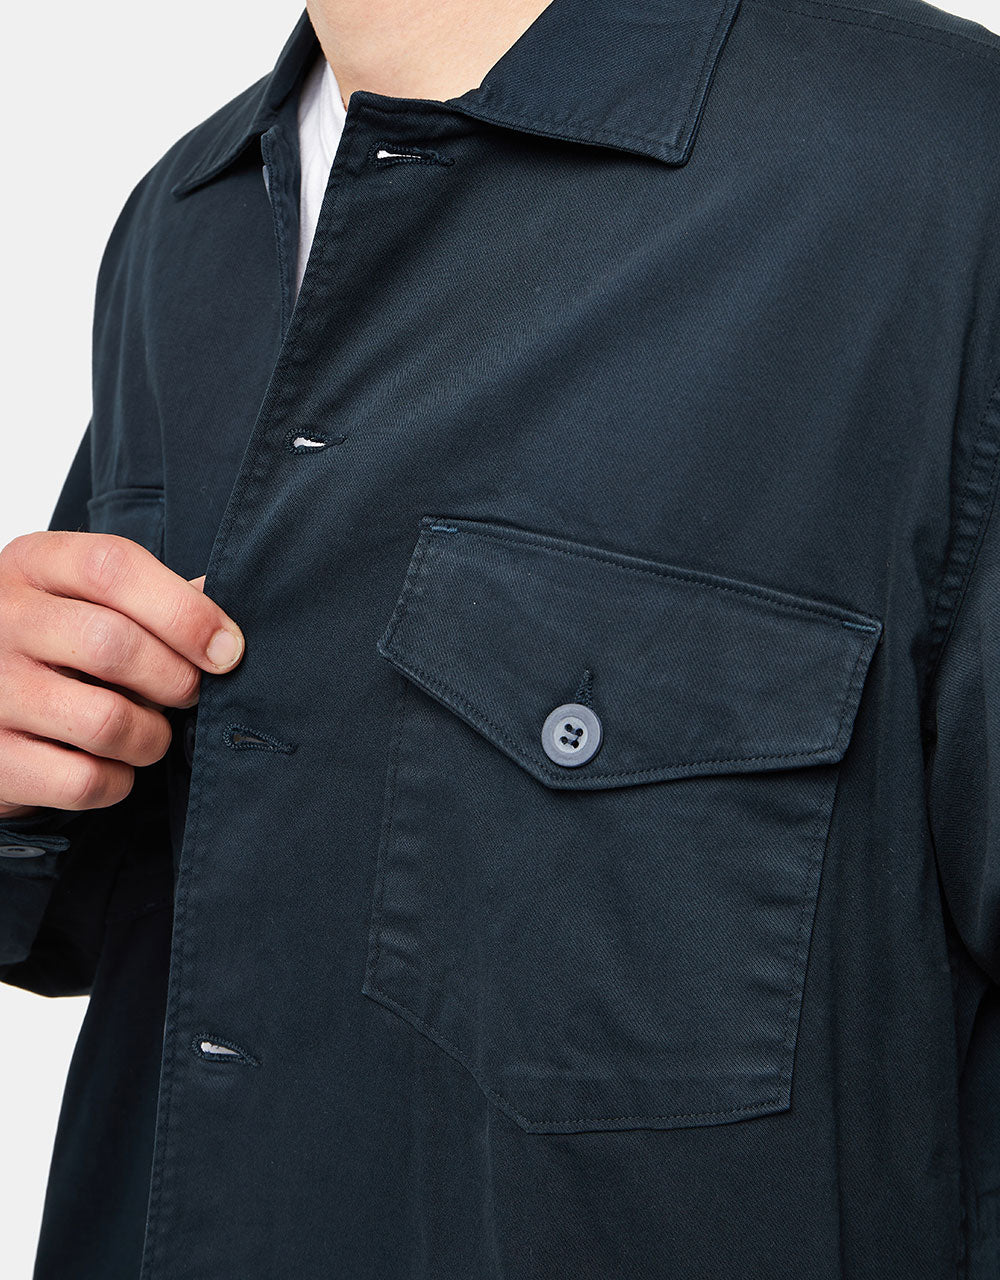 Route One Military Shirt - Navy